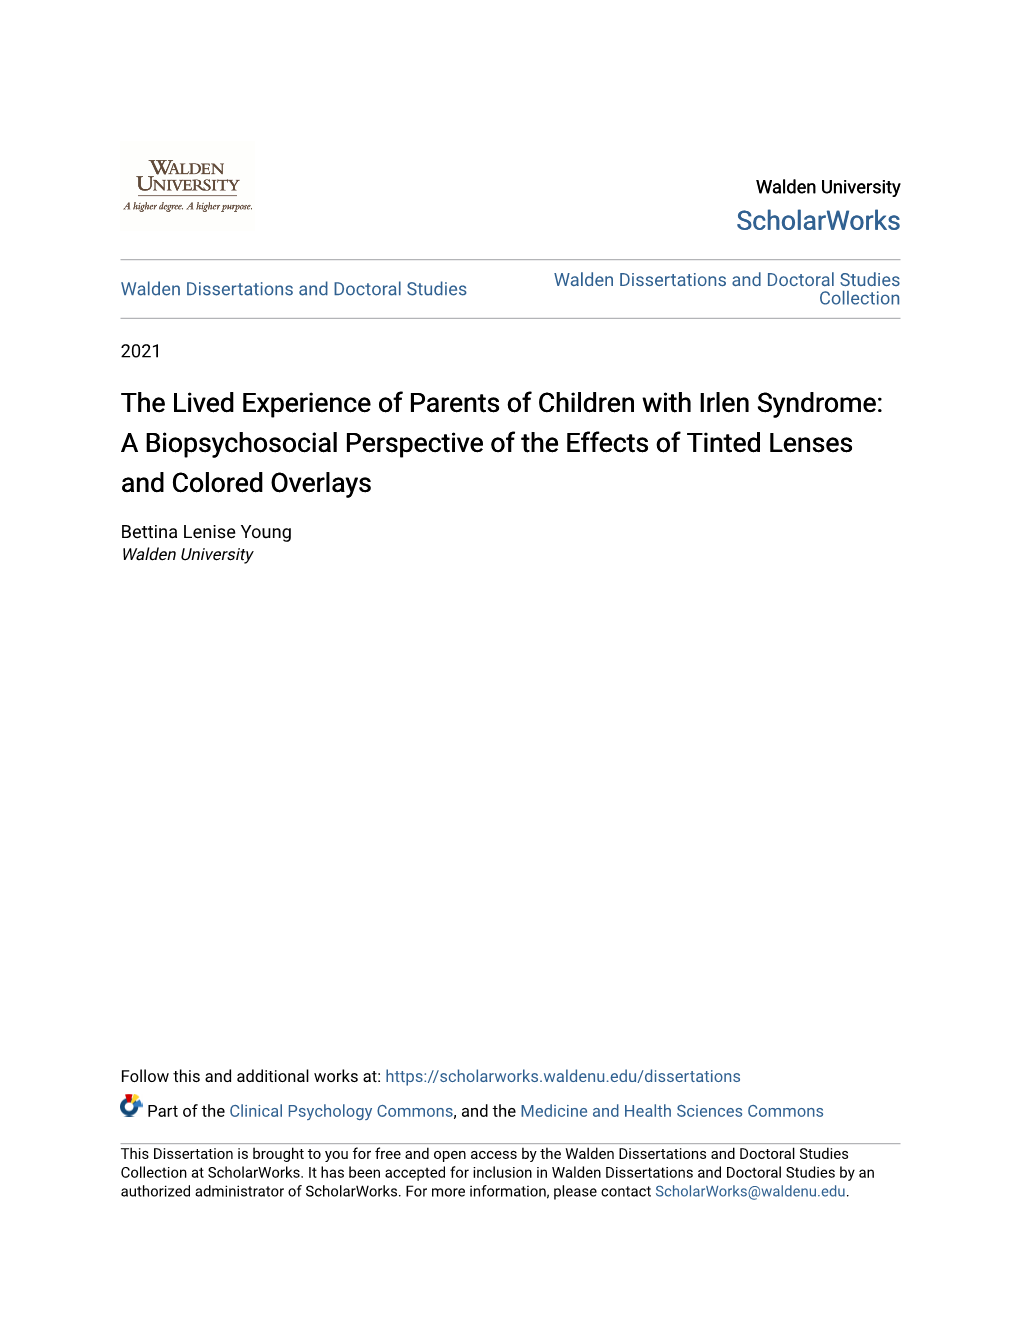 The Lived Experience of Parents of Children with Irlen Syndrome: a Biopsychosocial Perspective of the Effects of Tinted Lenses and Colored Overlays